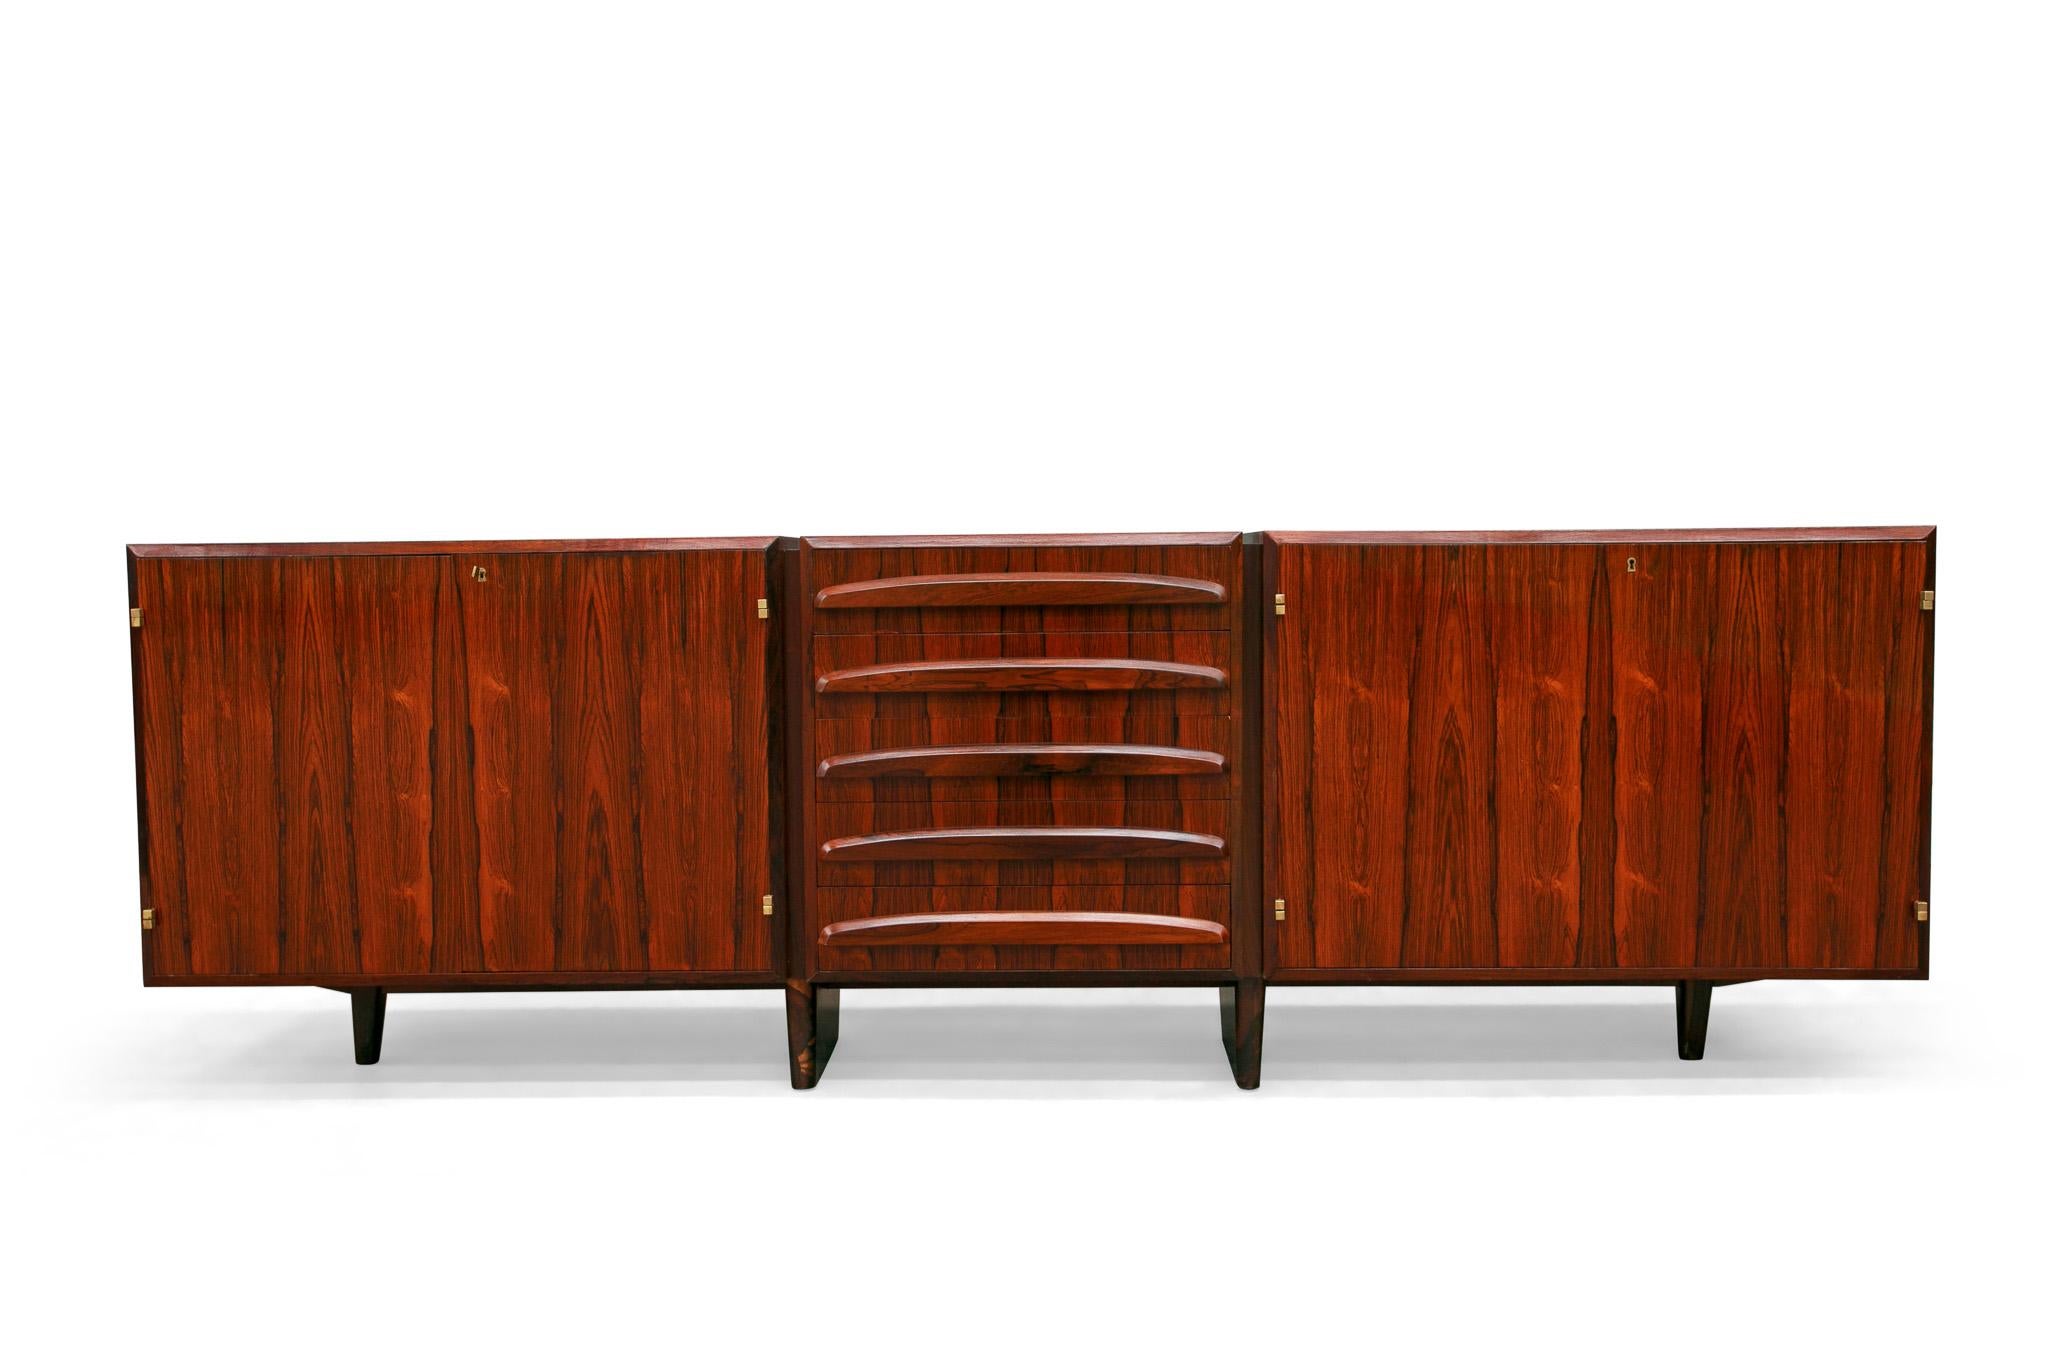 Available today, this Mid-Century Modern Credenza in Hardwood with Brass finishes designed by Jean Gillon in the sixties in Brazil is the FIND of the year.

The credenza has a rectangular structure made of Brazilian Rosewood, known as Jacaranda,